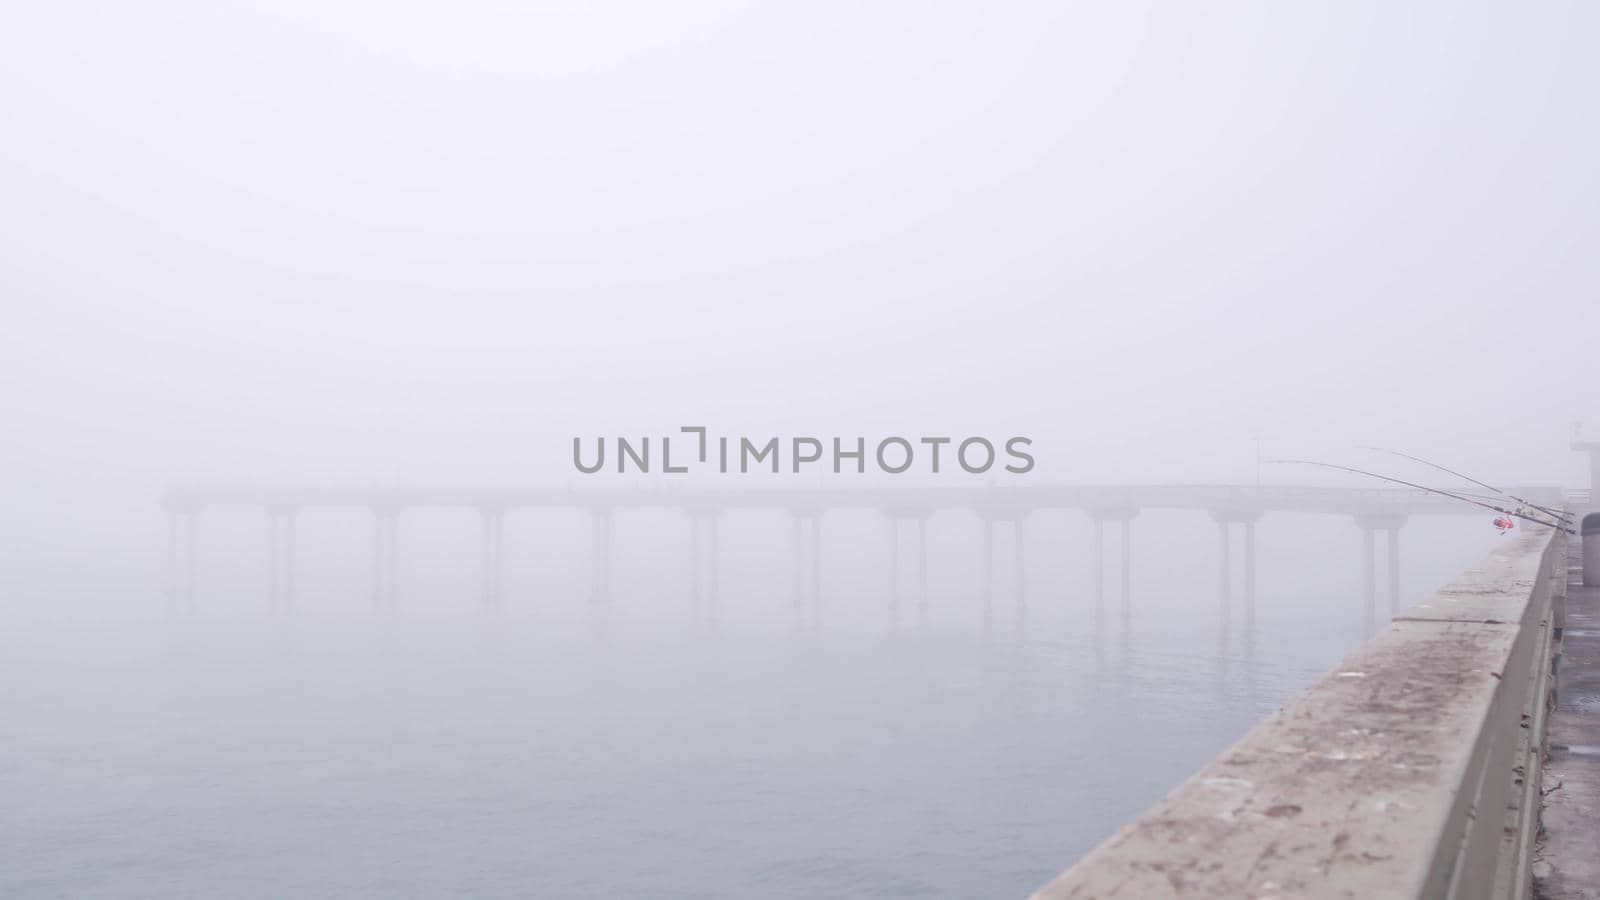 Wooden Ocean Beach pier in fog, misty California coast, USA. Foggy moody cloudy weather on San Diego shore. Calm tranquil silent atmosphere. Waterfront boardwalk. Fishing or recreational angling rod.